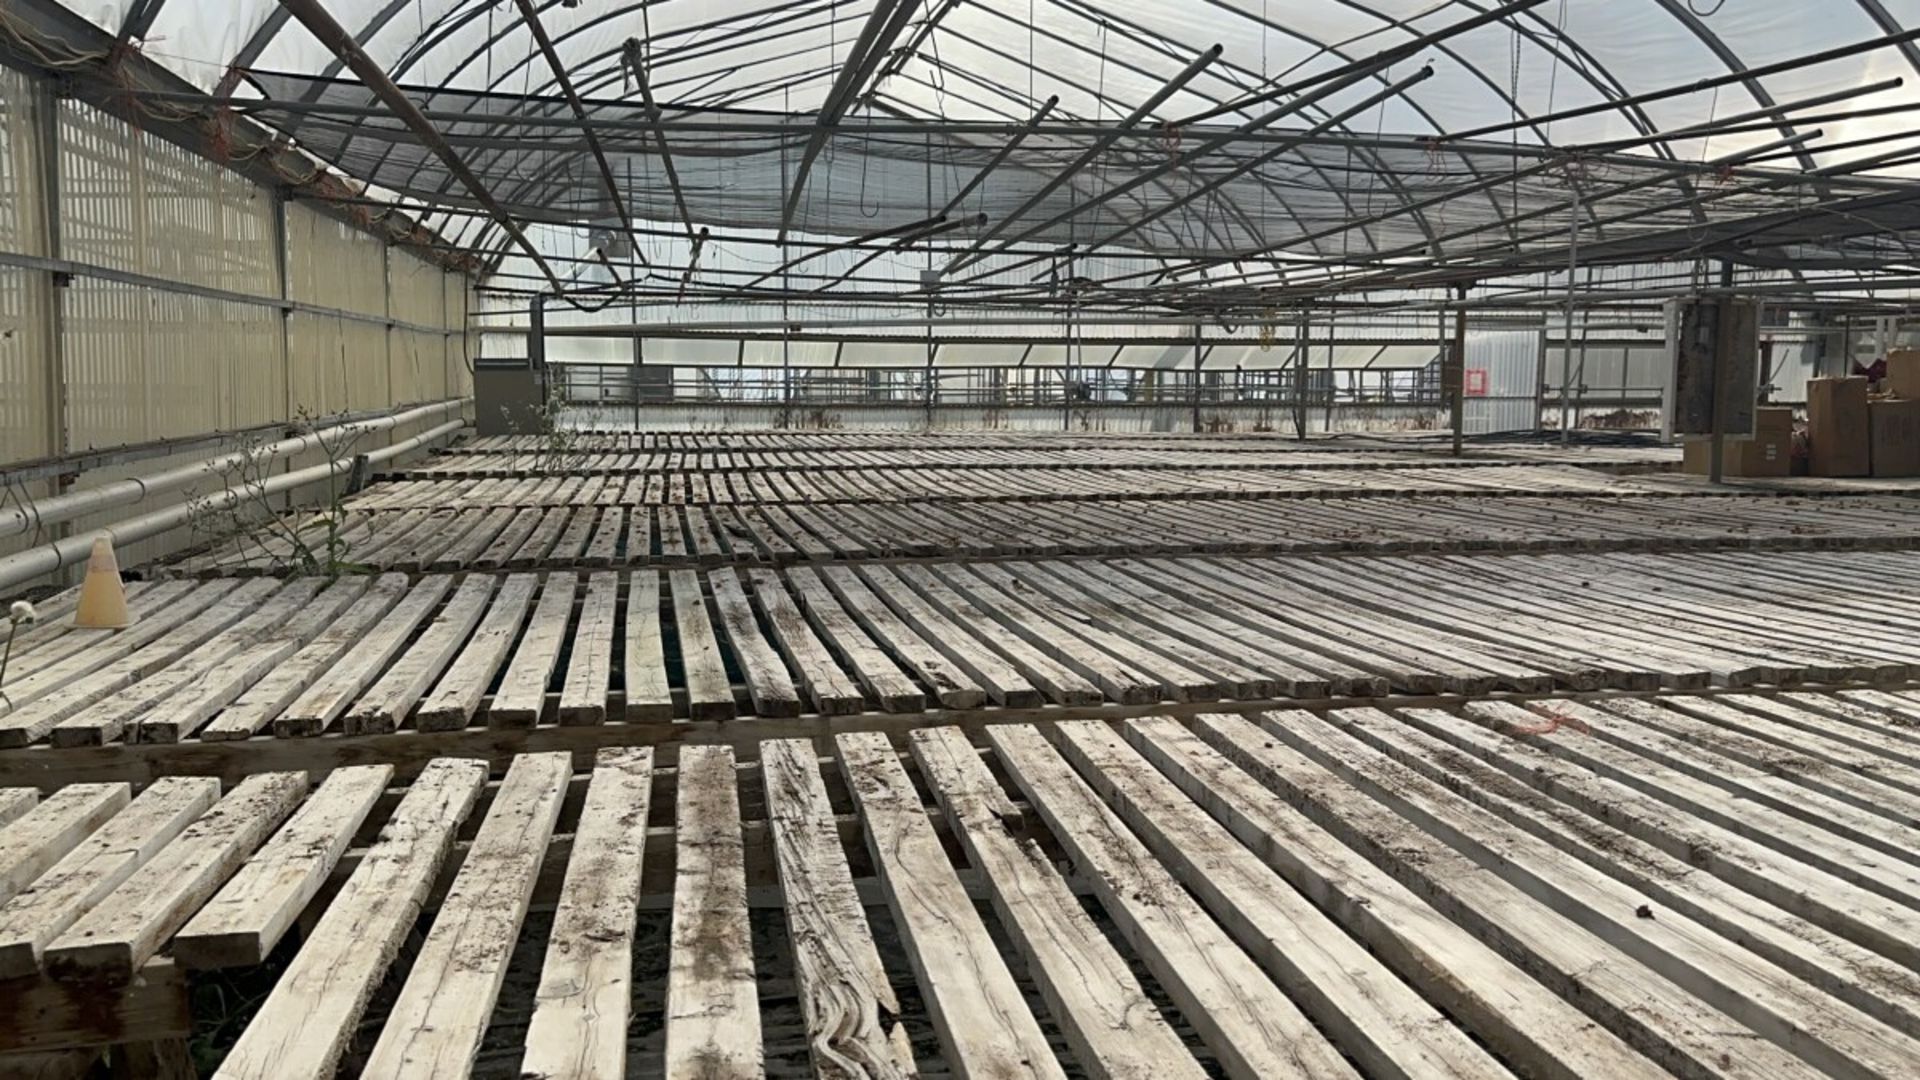 WESTBROOK GUTTER CONNECT 2-BAY GREENHOUSE 60FT X 144FT X 96” H & 2-BAY 60FT X 72 FT X 96”, INCLUDING - Image 81 of 95